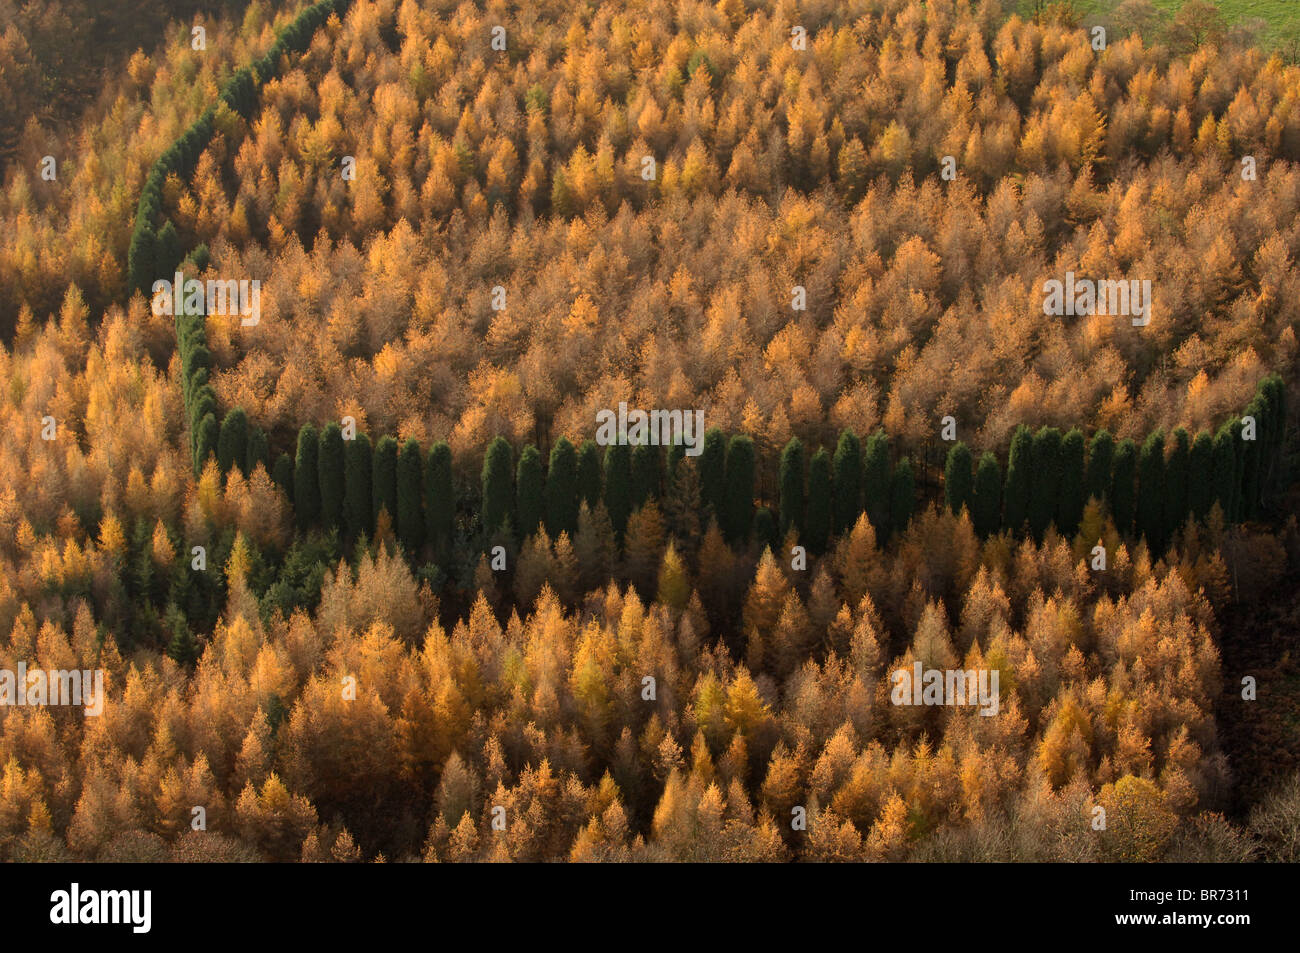 Aerial view of trees in autumn Uk with a line of evergreens breaking the pattern of golden brown. Cannock Chase Stock Photo